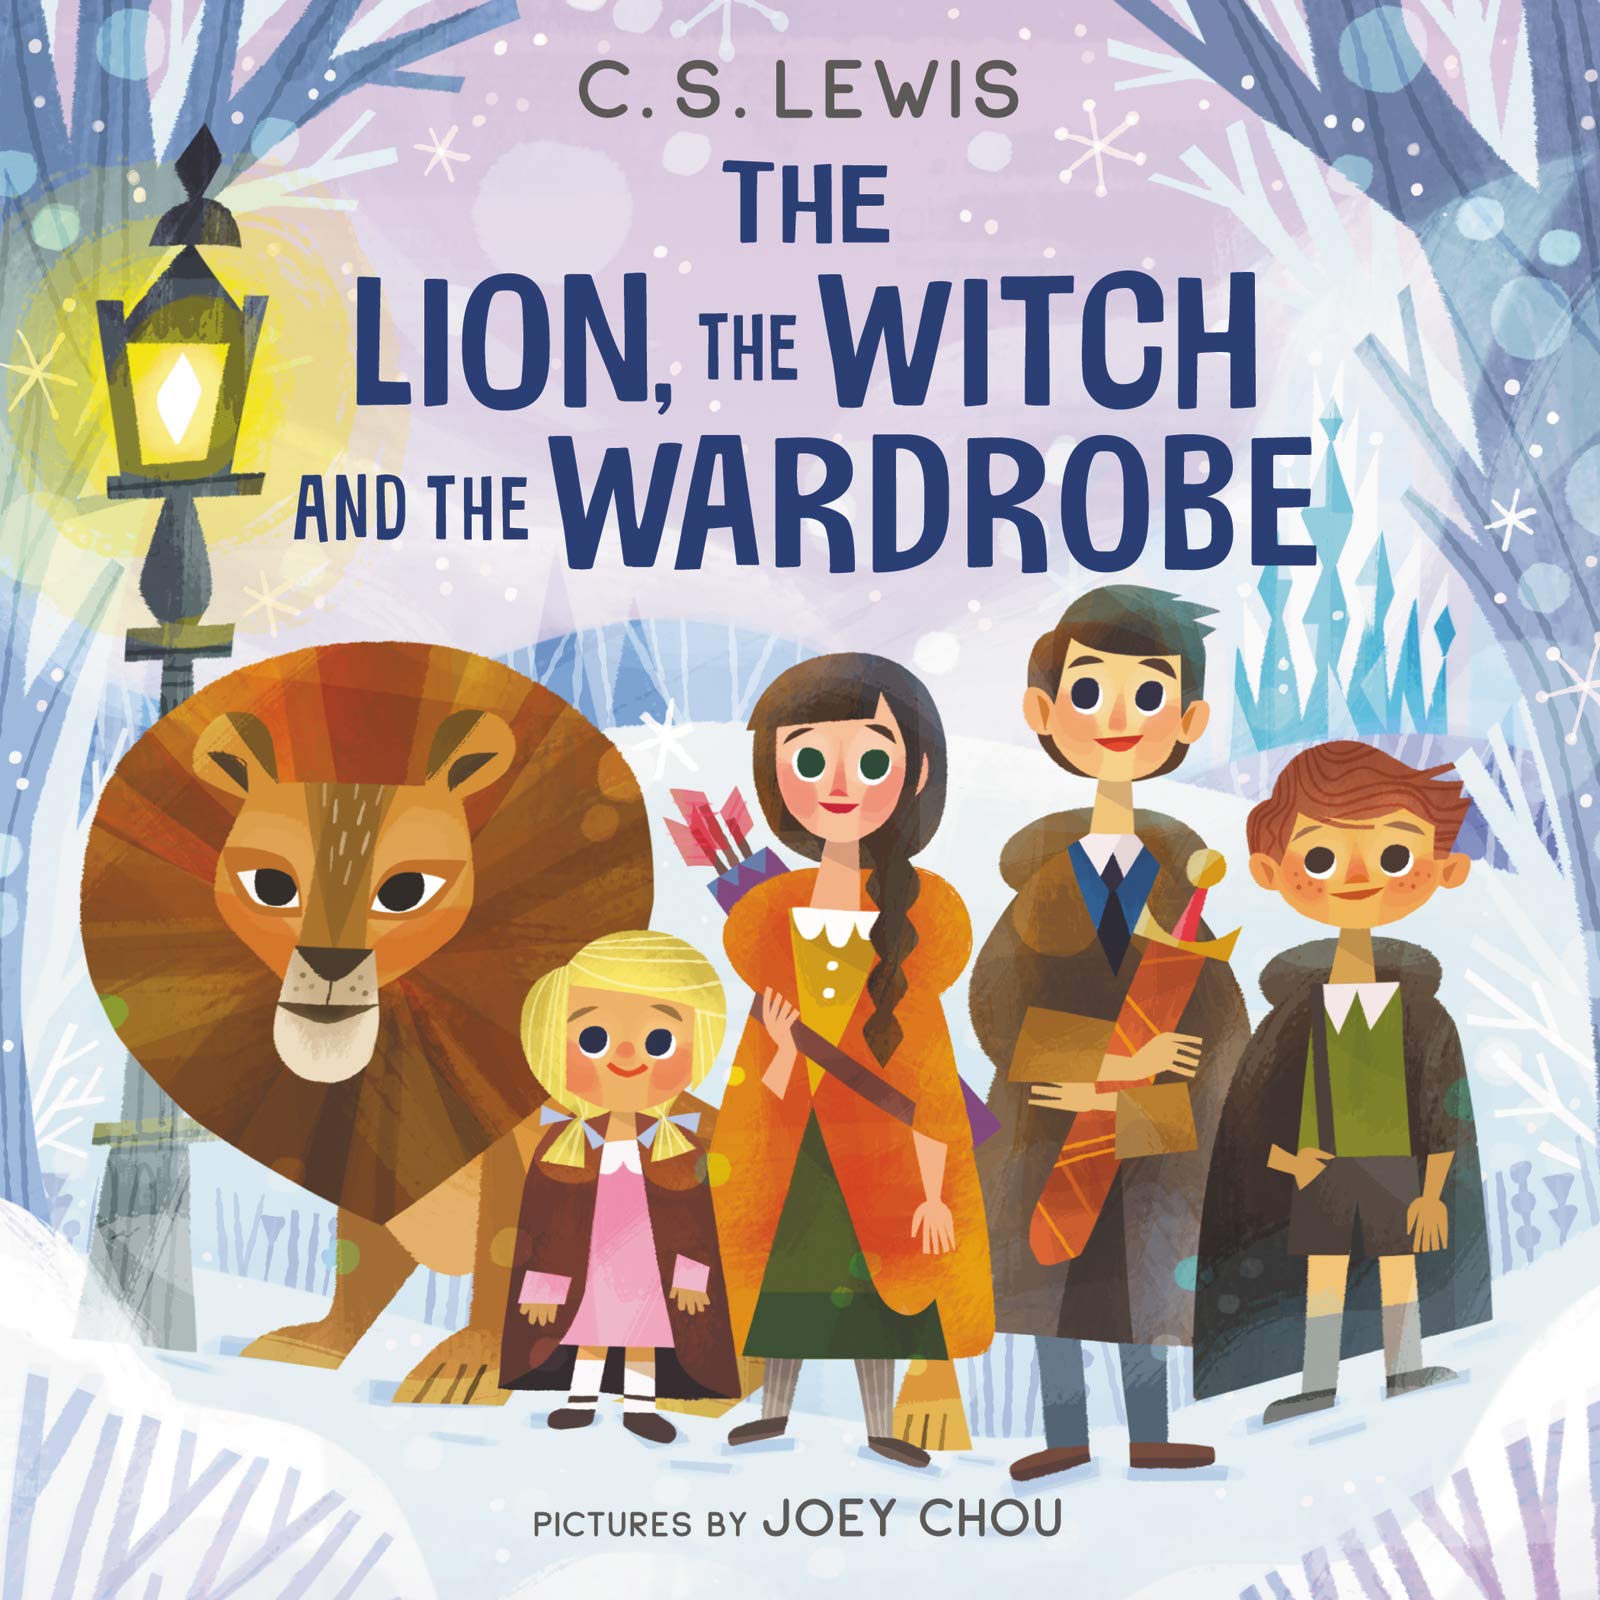 The Lion, the Witch and the Wardrobe | C. S. Lewis